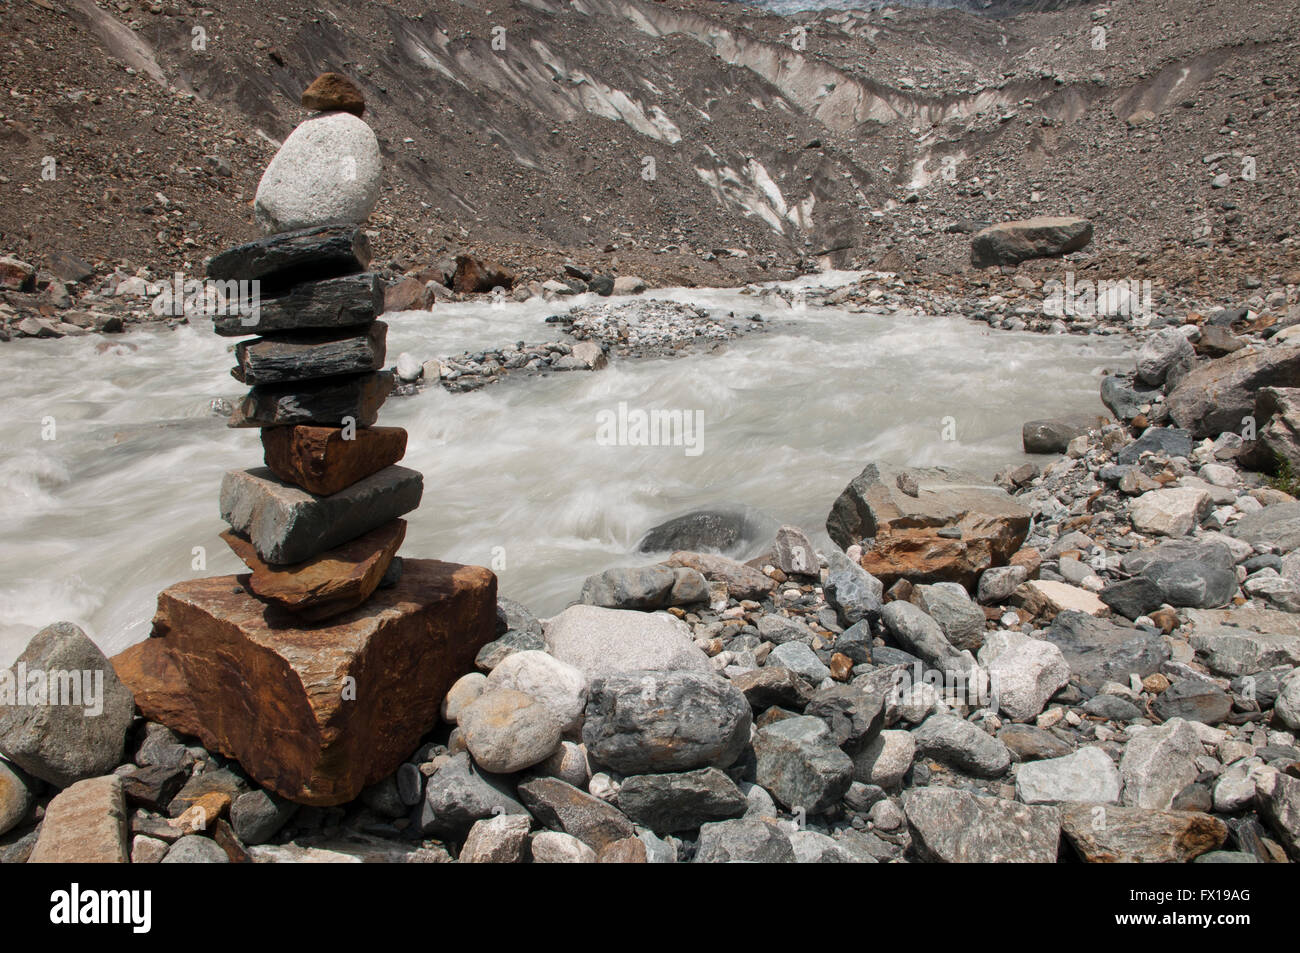 Stacks of rocks  called cairns, ducks or duckies along a river from melting Chalaadi glacier, Mestia, Georgia Stock Photo